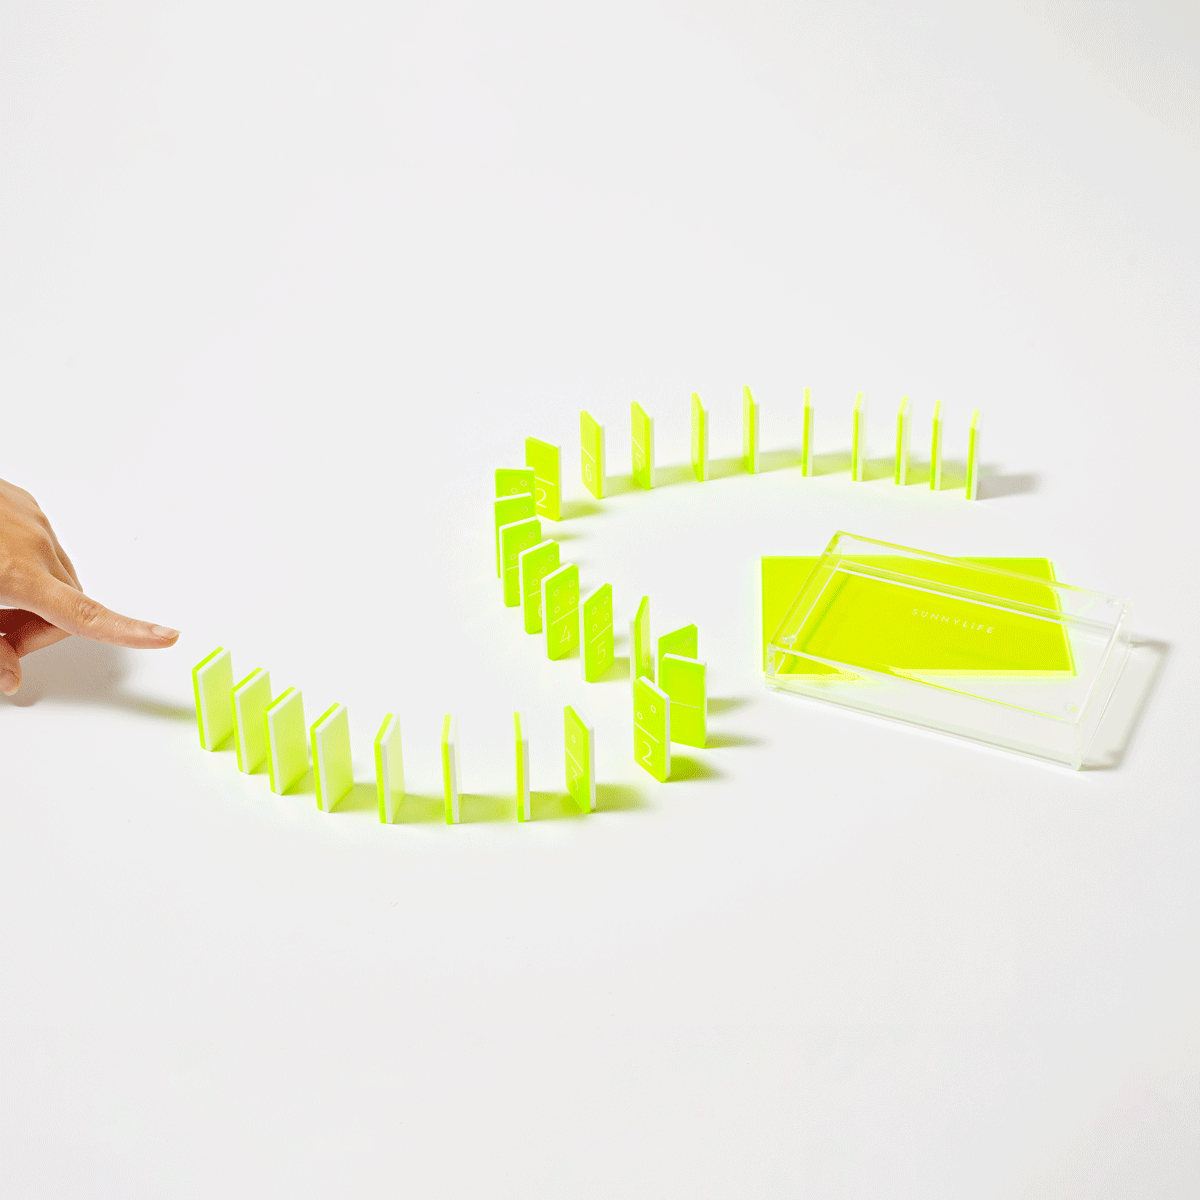 Lucite Dominoes | Limited Edition Neon